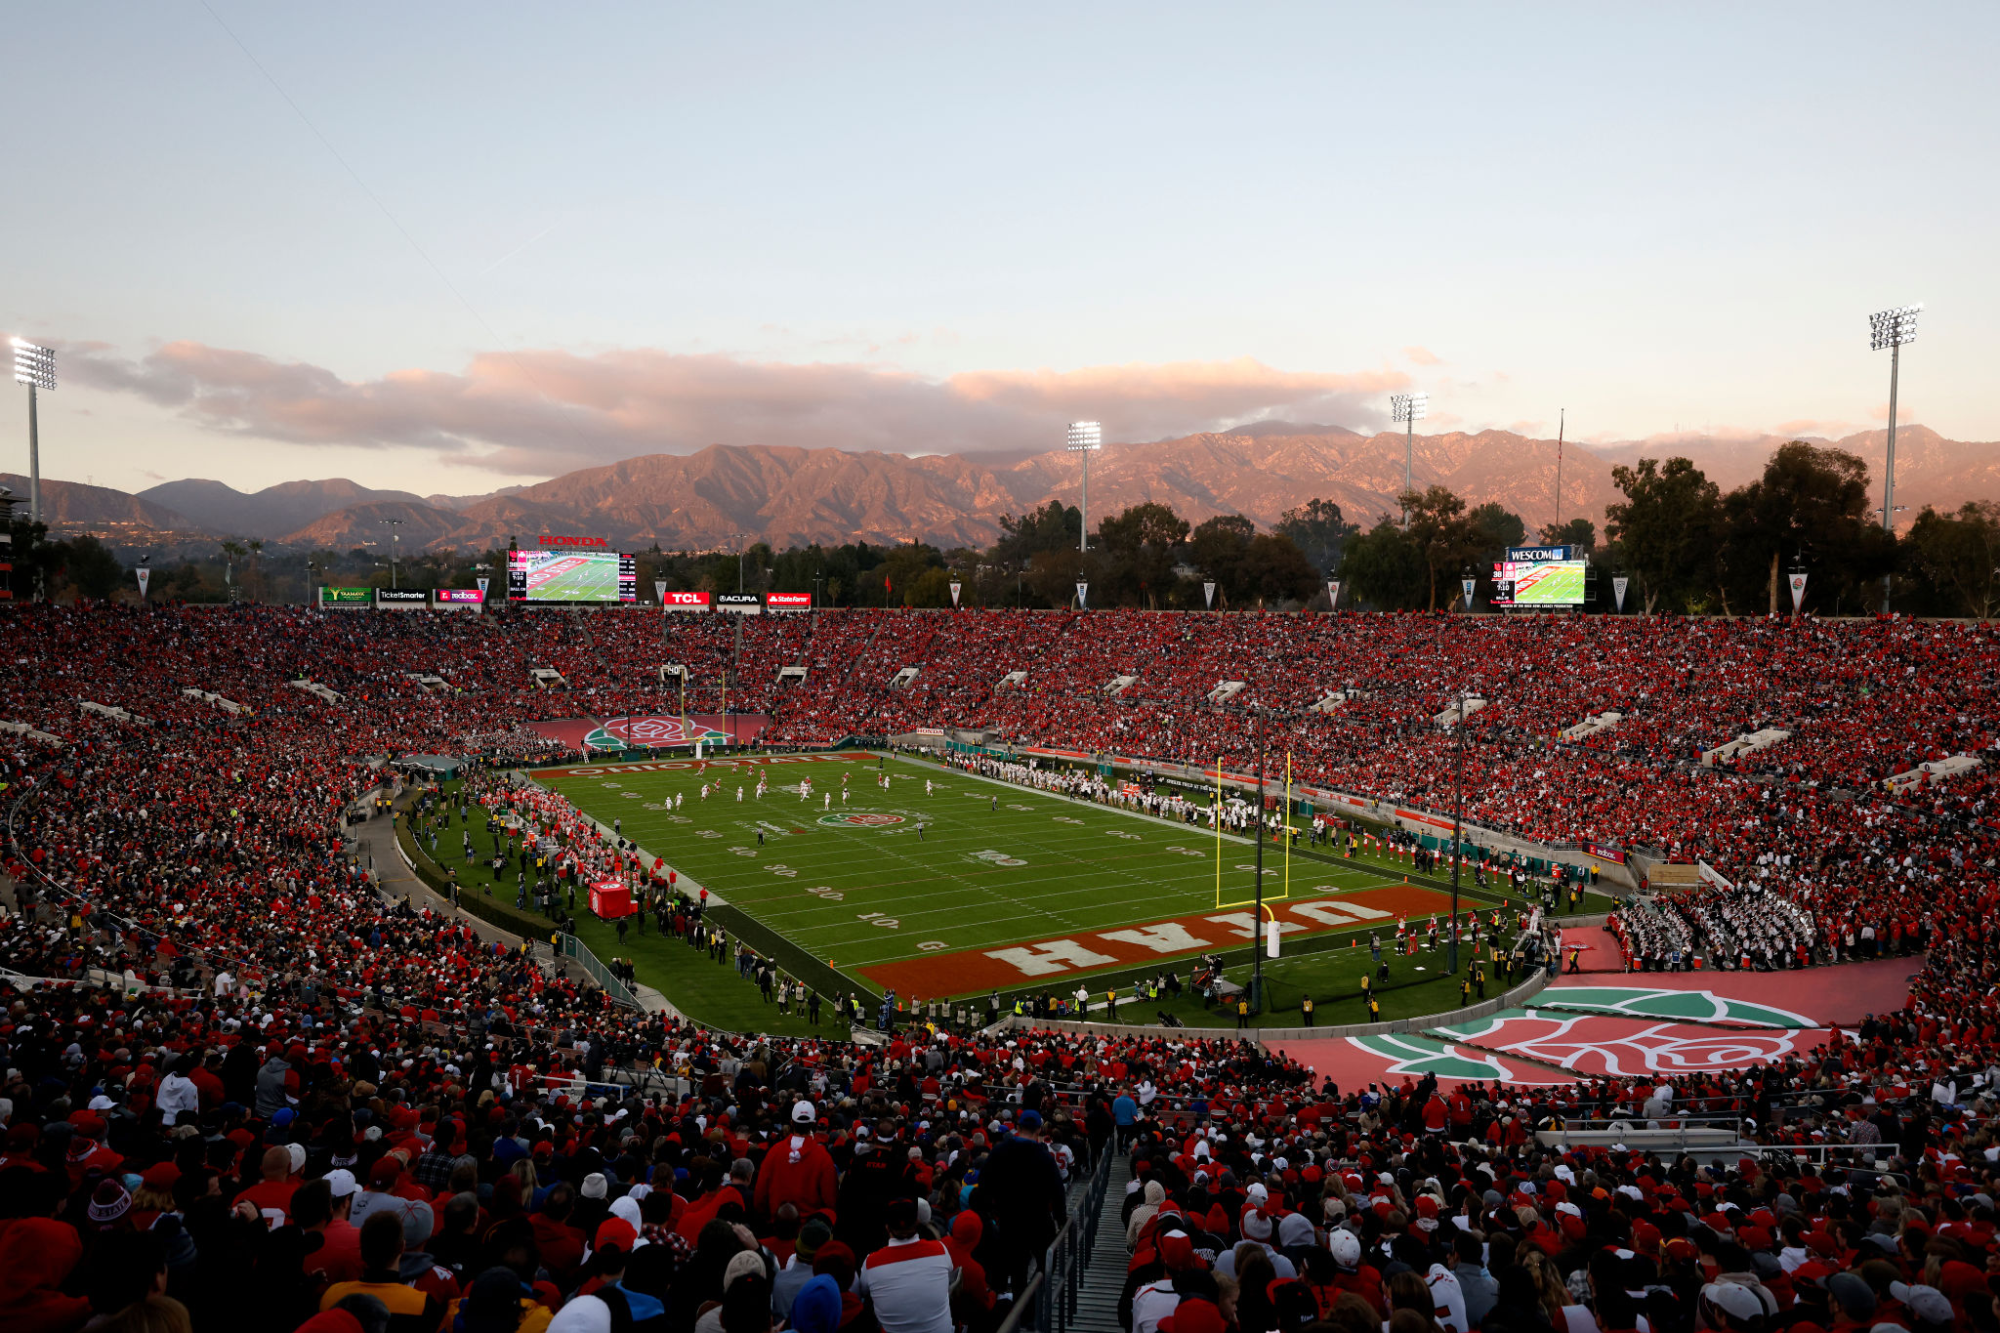 A view of the Rose Bowl during Saturday's game between Ohio State and Utah.